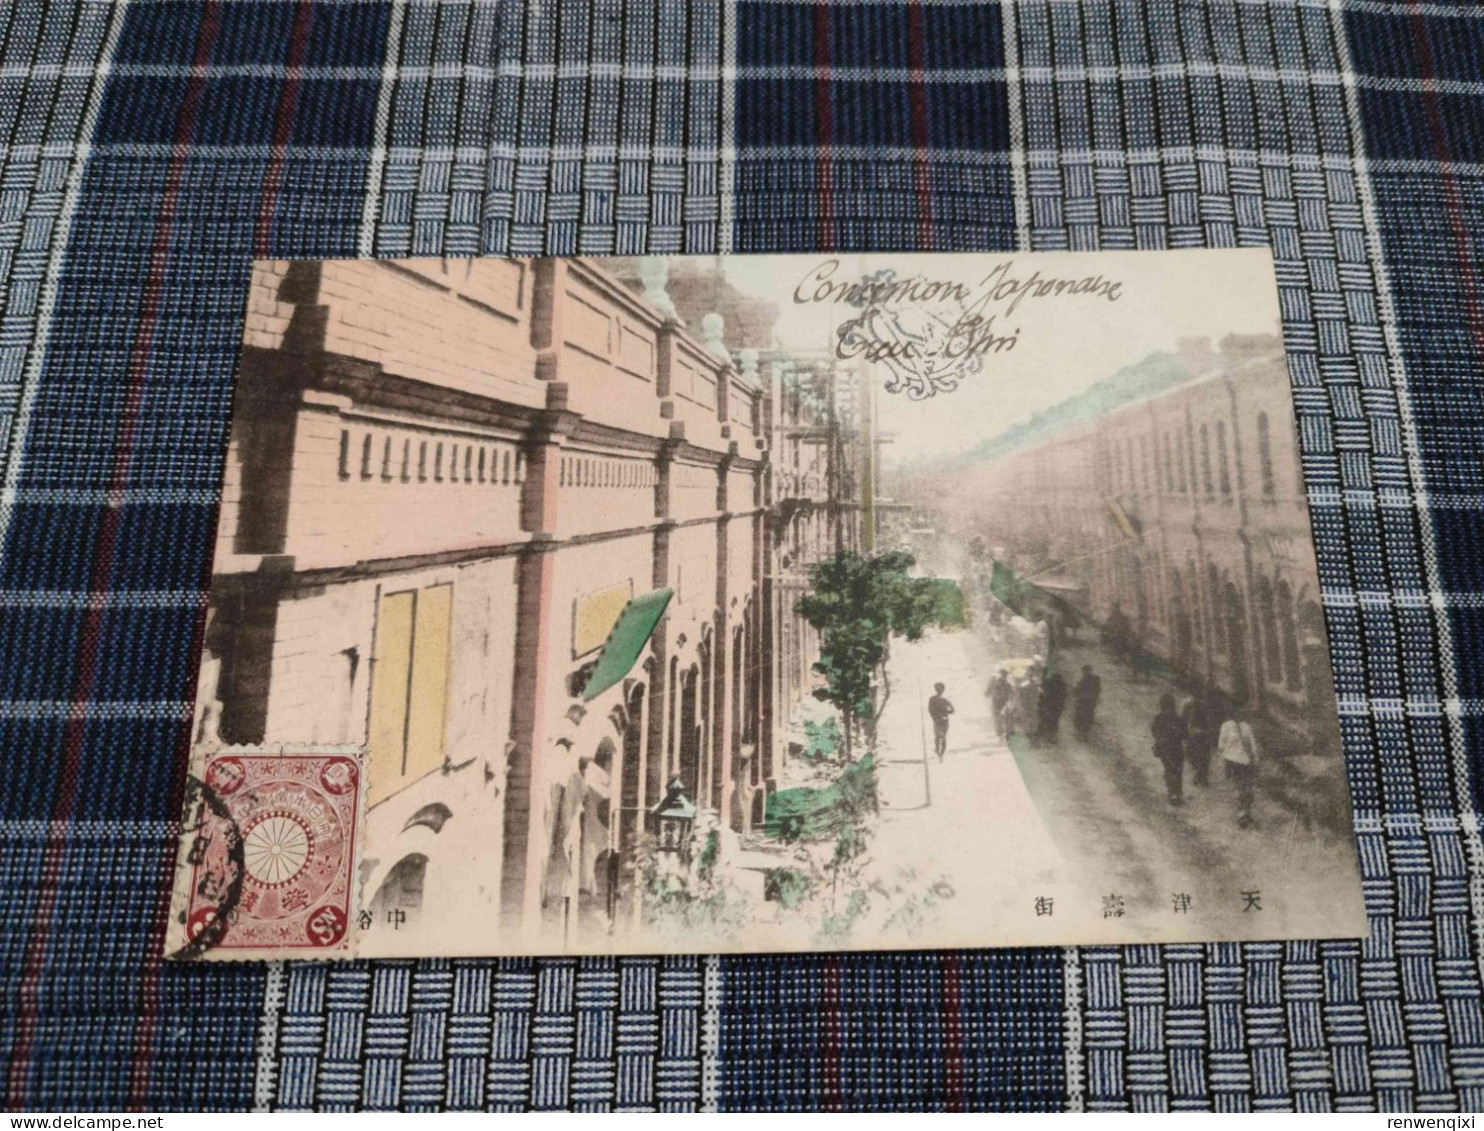 CHINA Cina Chine 1900's Tientsin Japanese Concession日租界寿街 - Chine